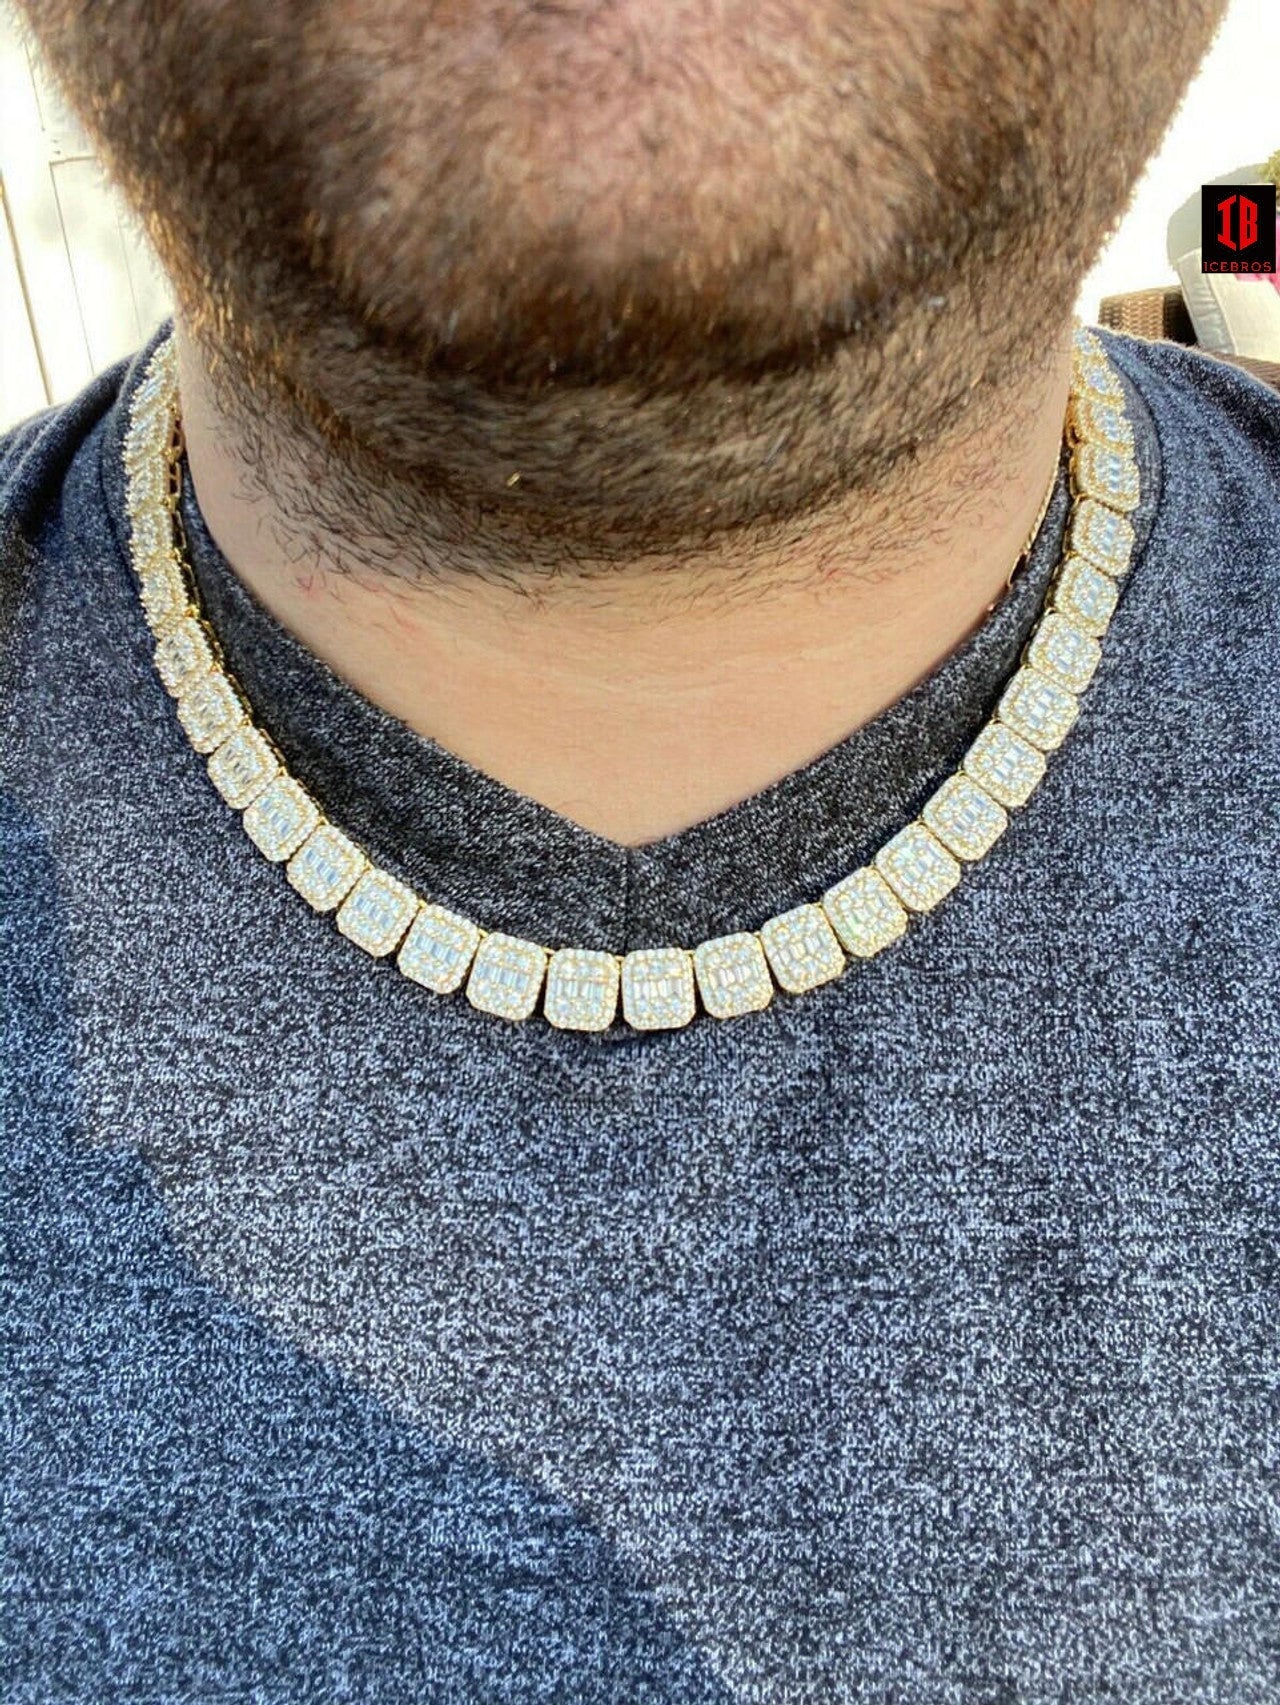 Men's Paved 11mm Baguette Tennis Chain Rose Gold Over Real 925 Silver 18" Choker - 30" (YELLOW GOLD)